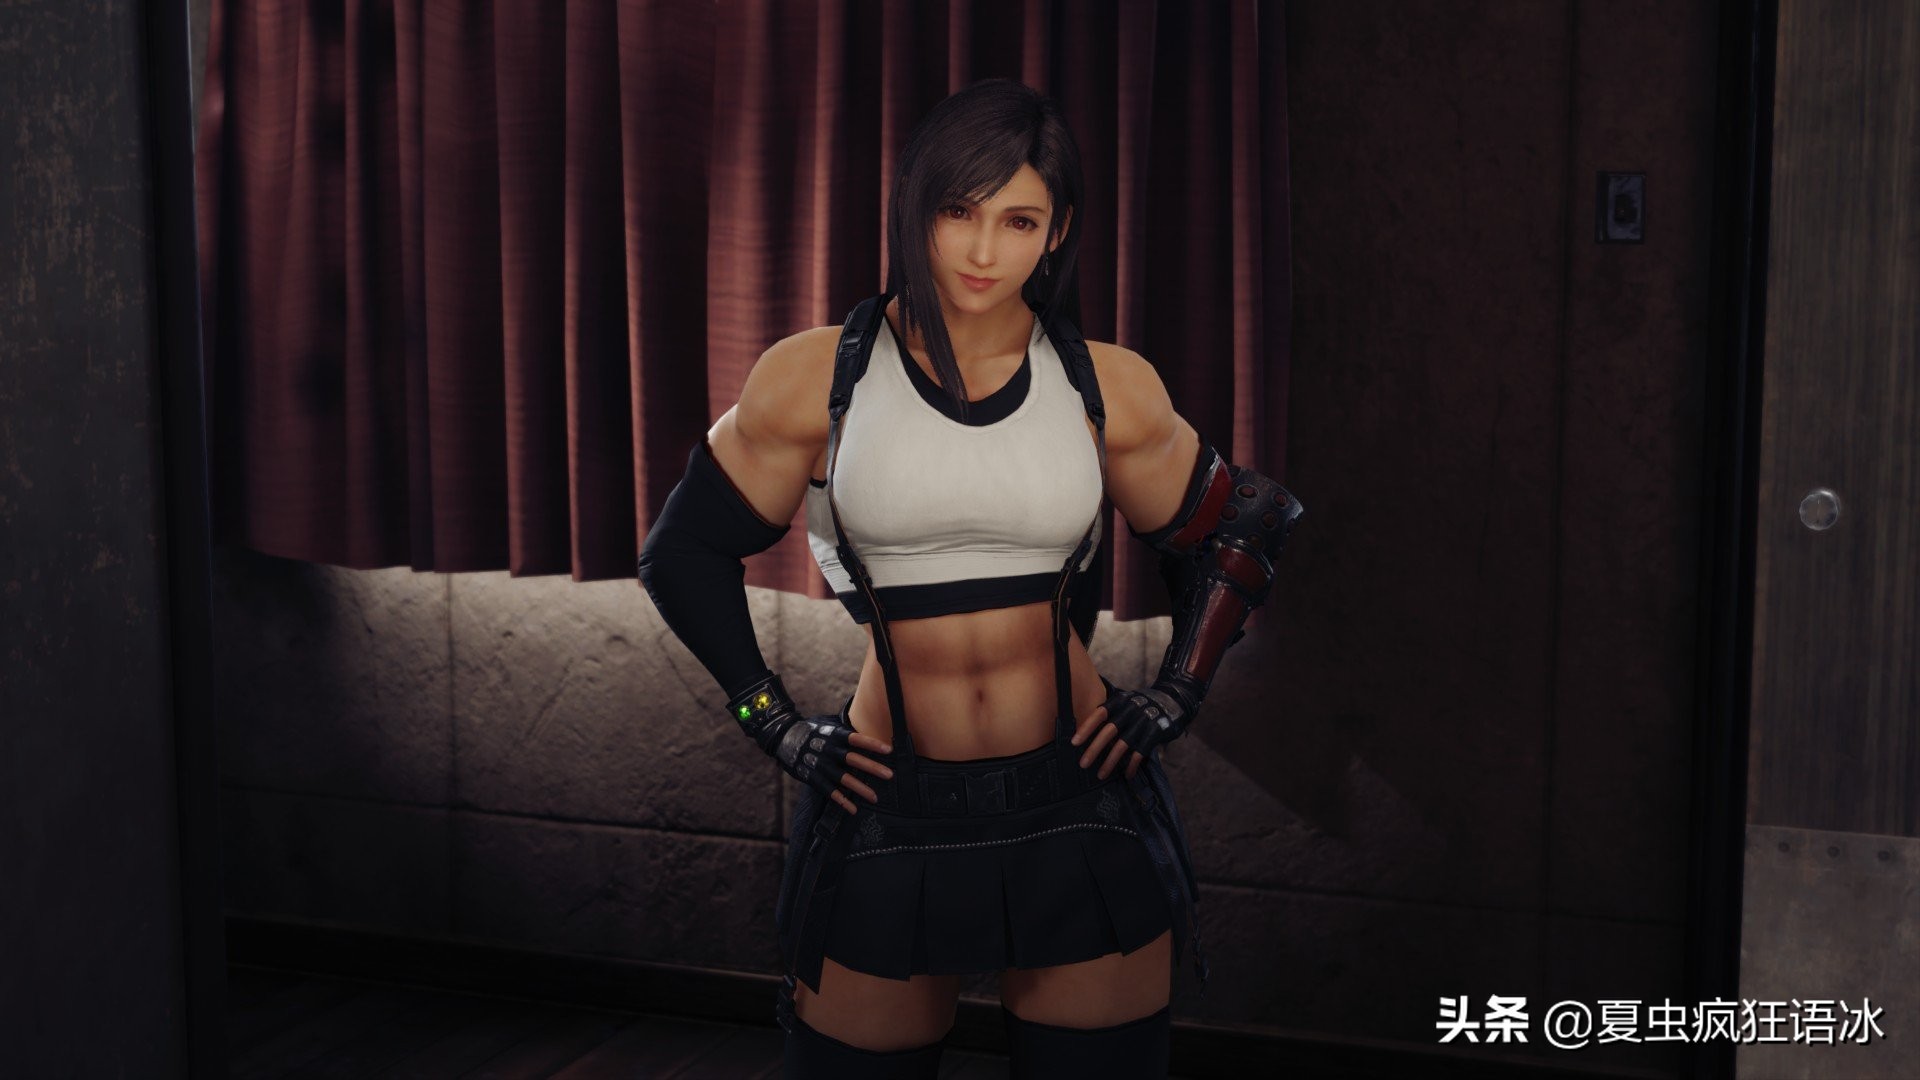 Final Fantasy Remake Tifa Muscles Mod Launched This Is What It Looks Like To Be Combative